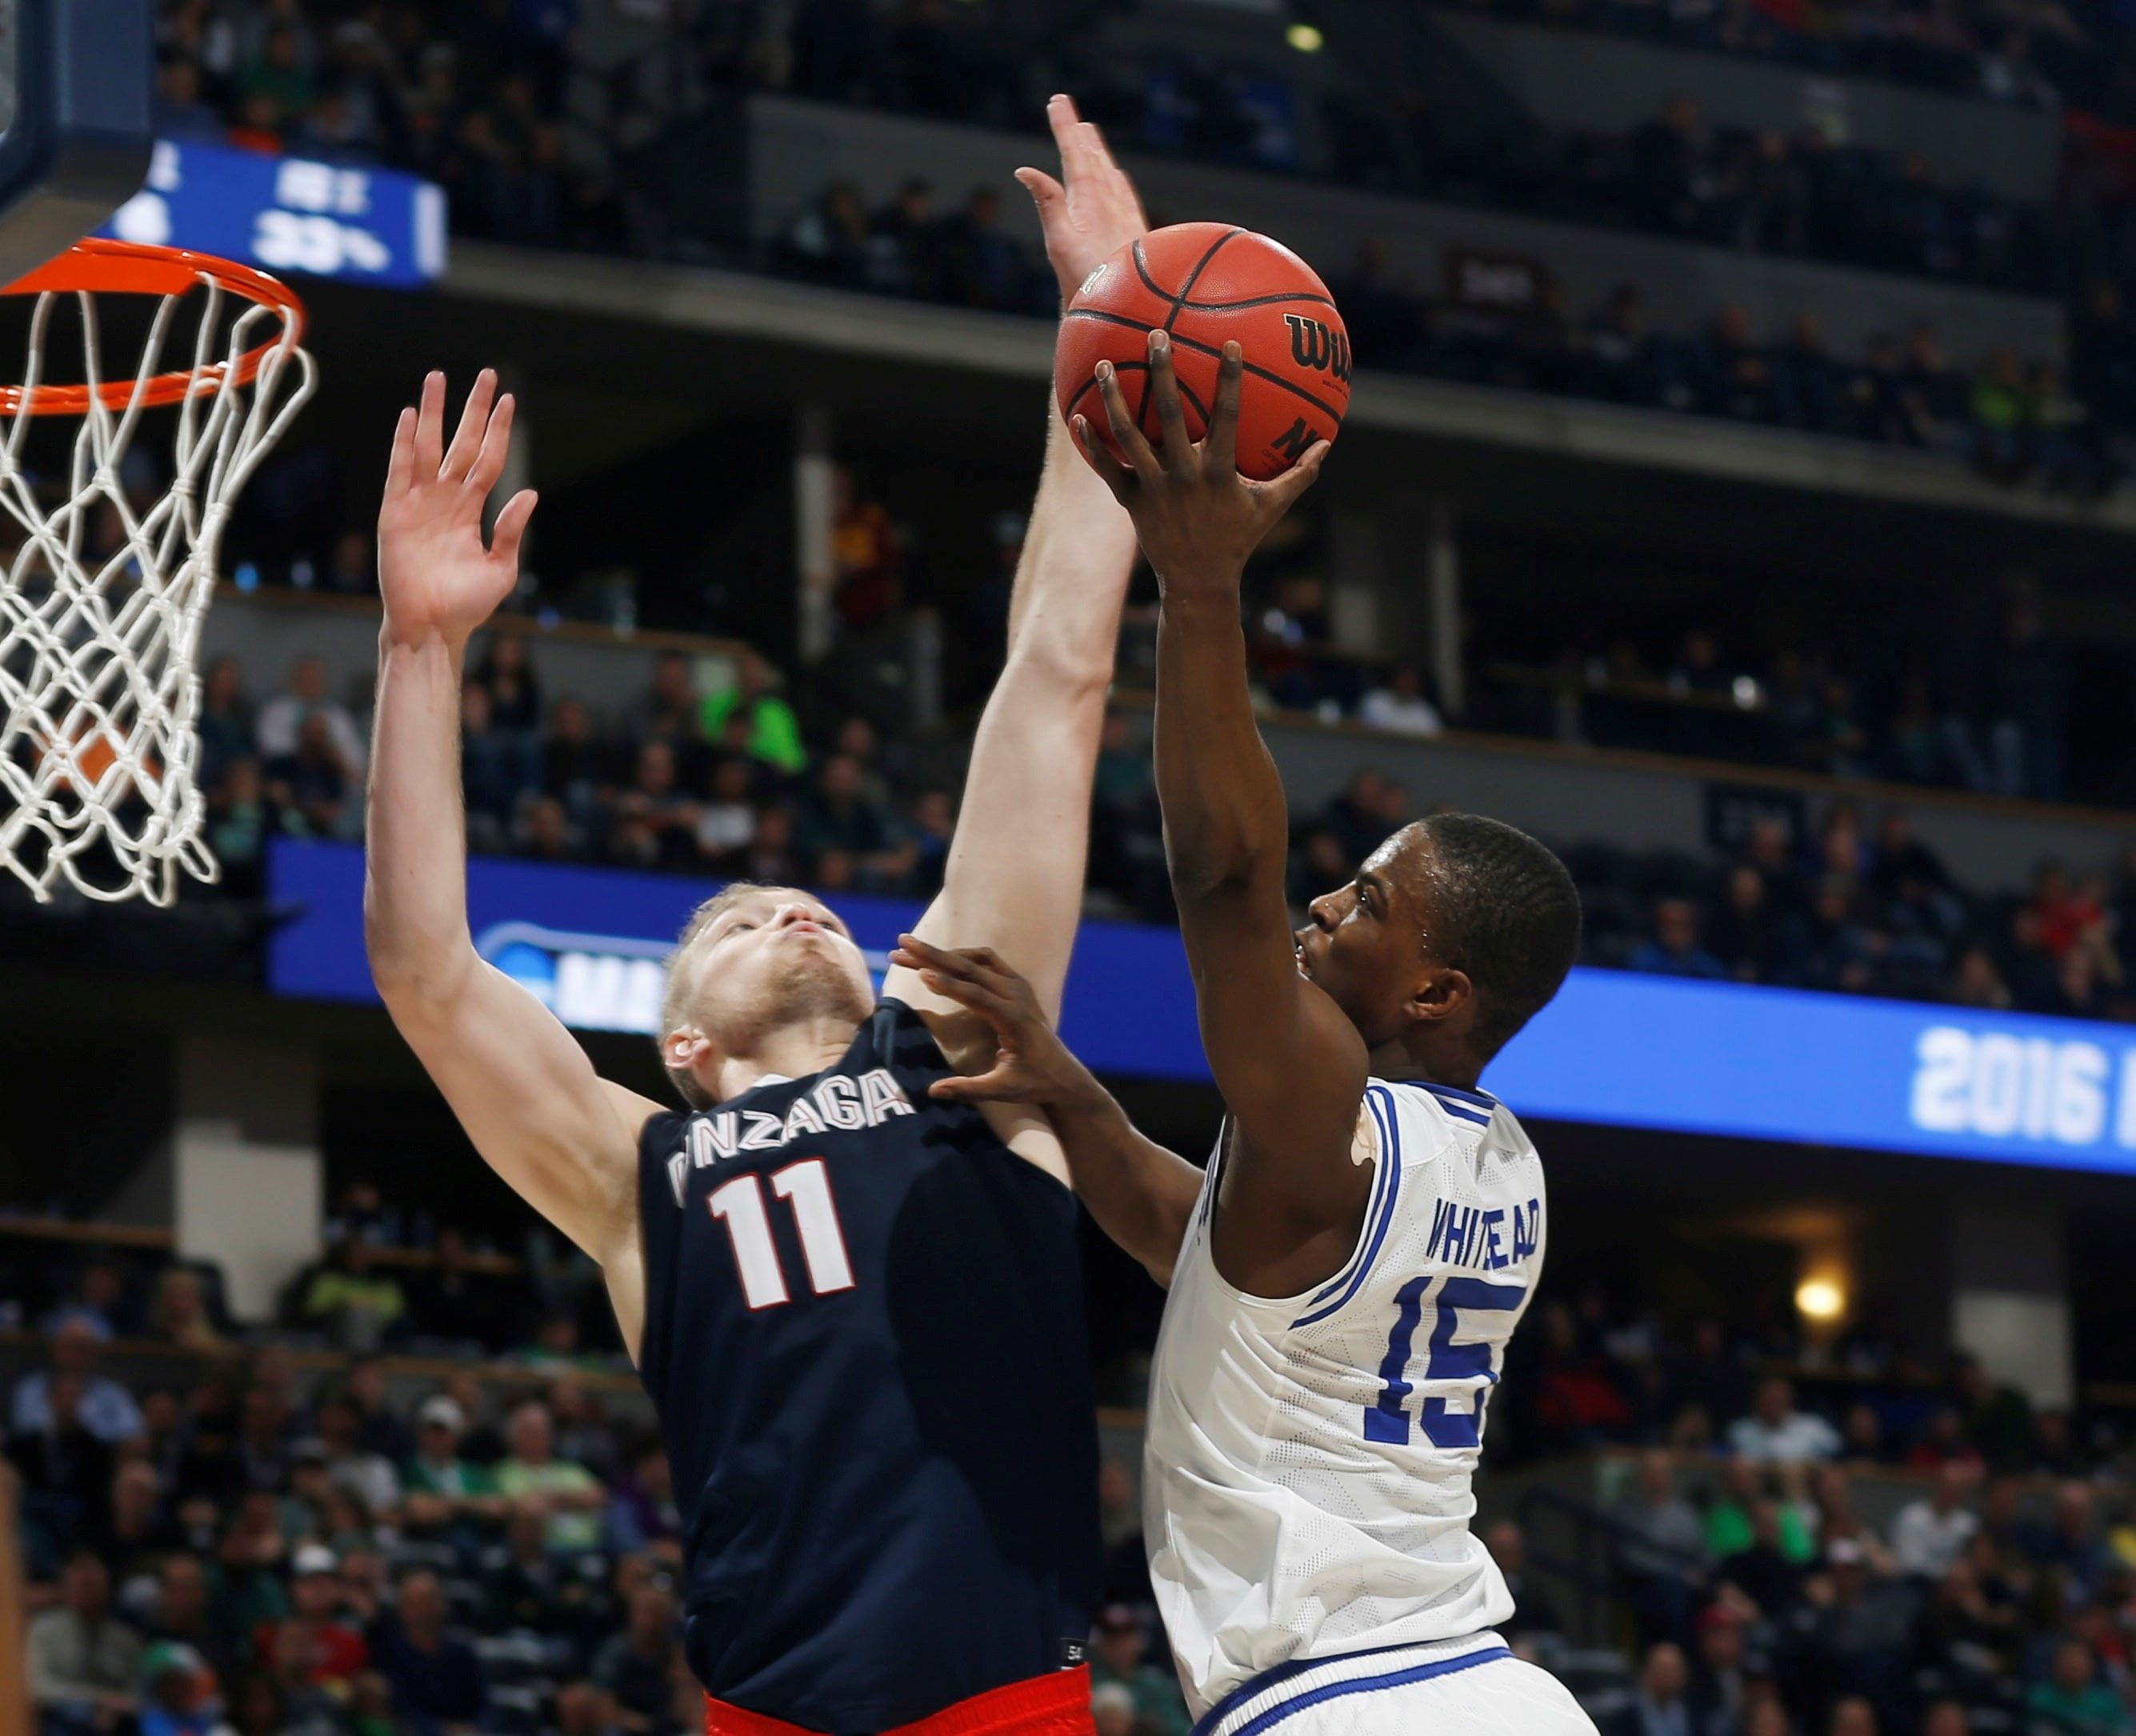 Seton Hall guard Isaiah Whitehead, right, drives for a shot as Gonzaga forward Domantas Sabonis defends during the second half of a first-round men's college basketball game Thursday, March 17, 2016, in the NCAA Tournament in Denver. Gonzaga won 68-52.